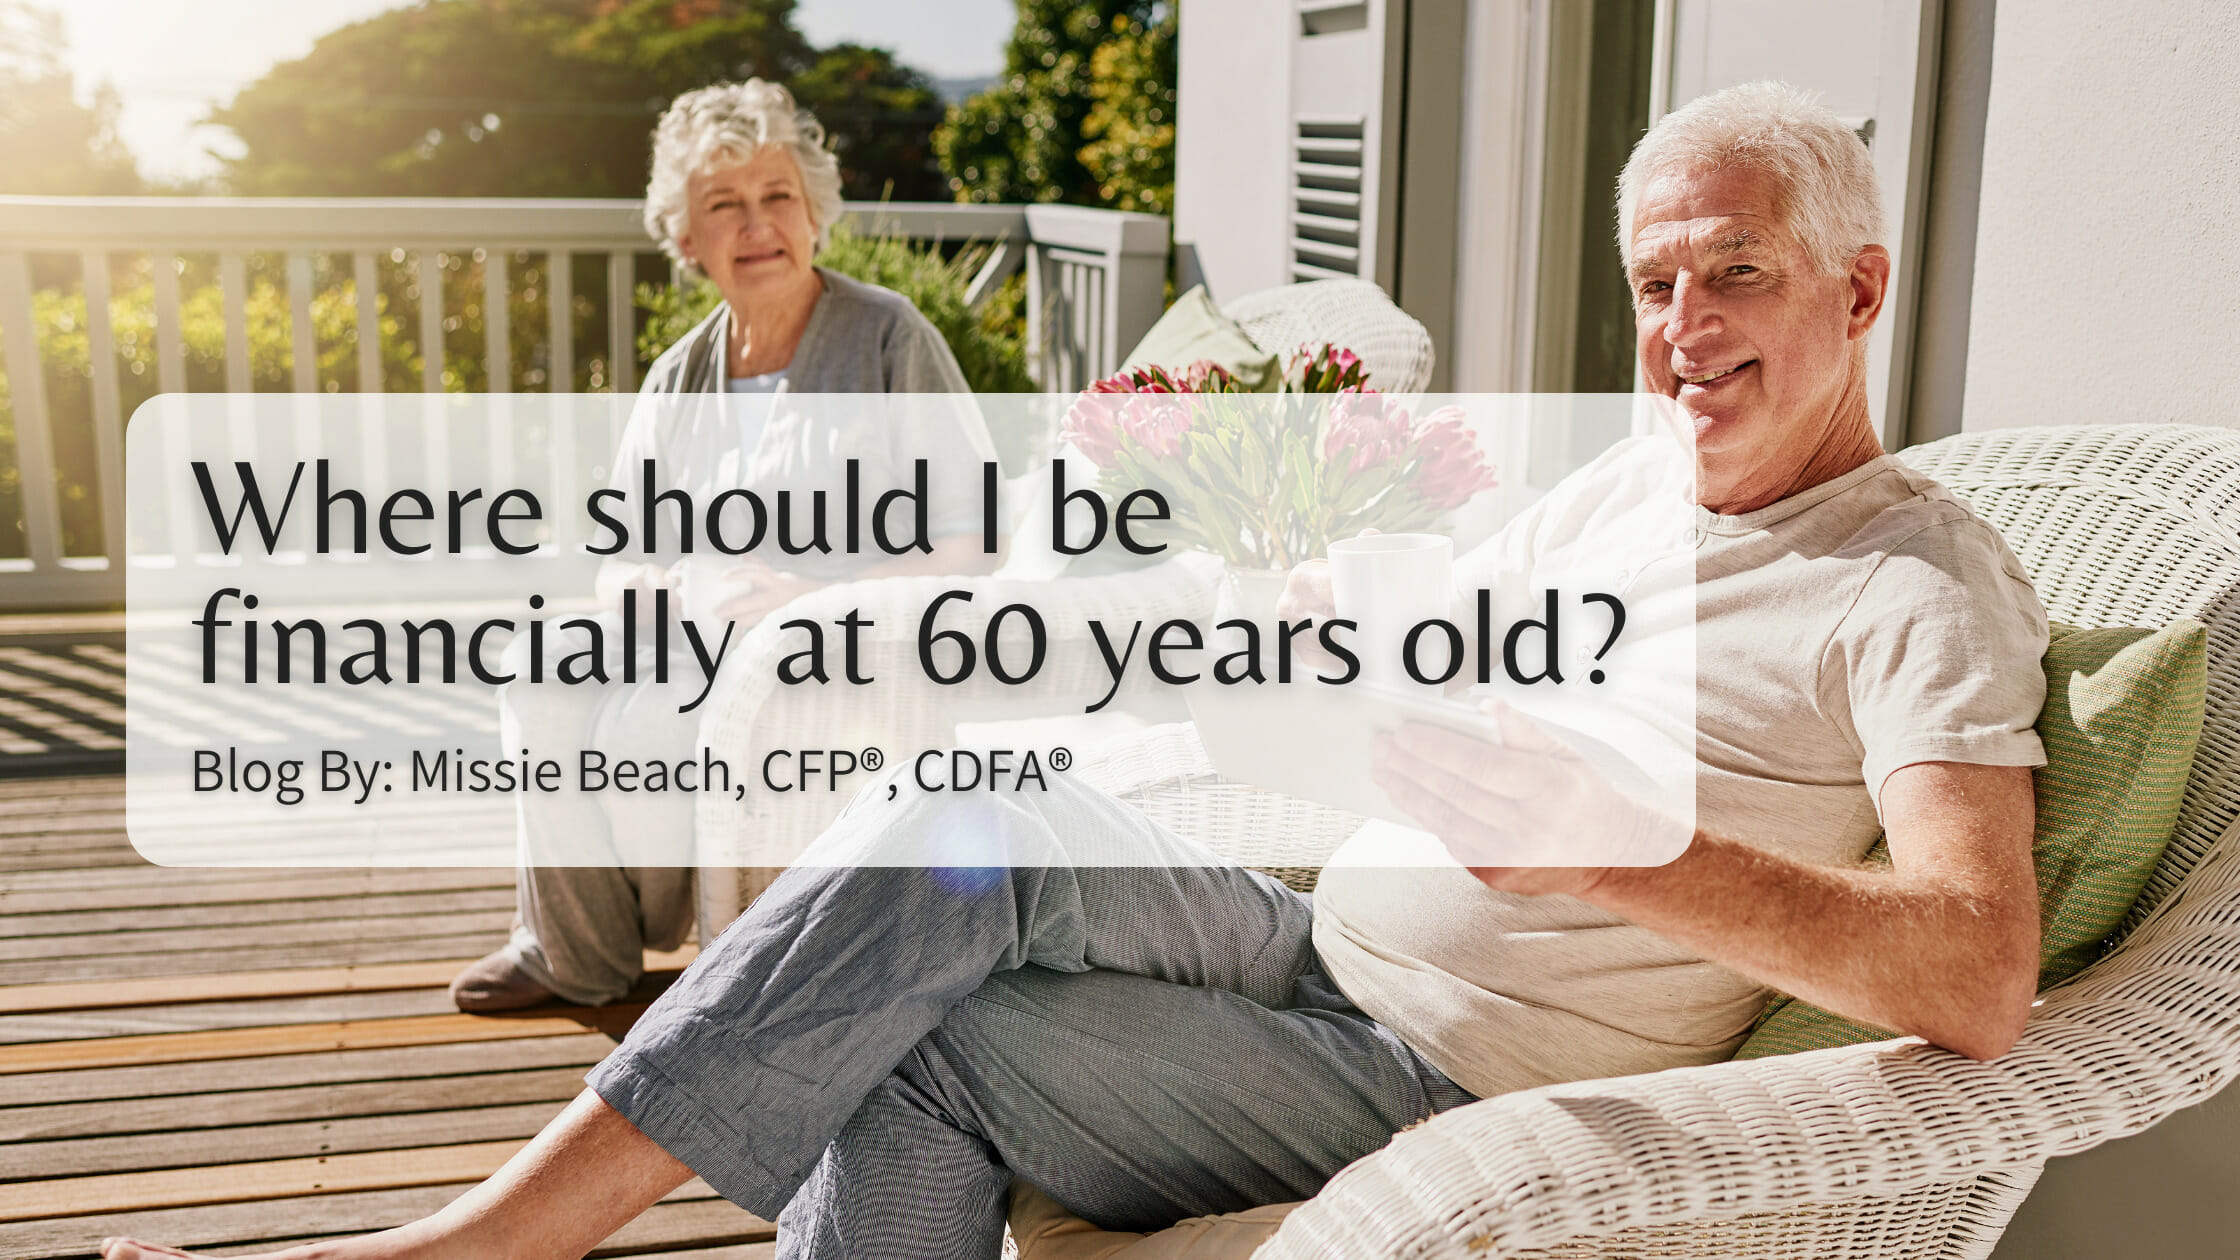 Where should I be financially at 60 years old?